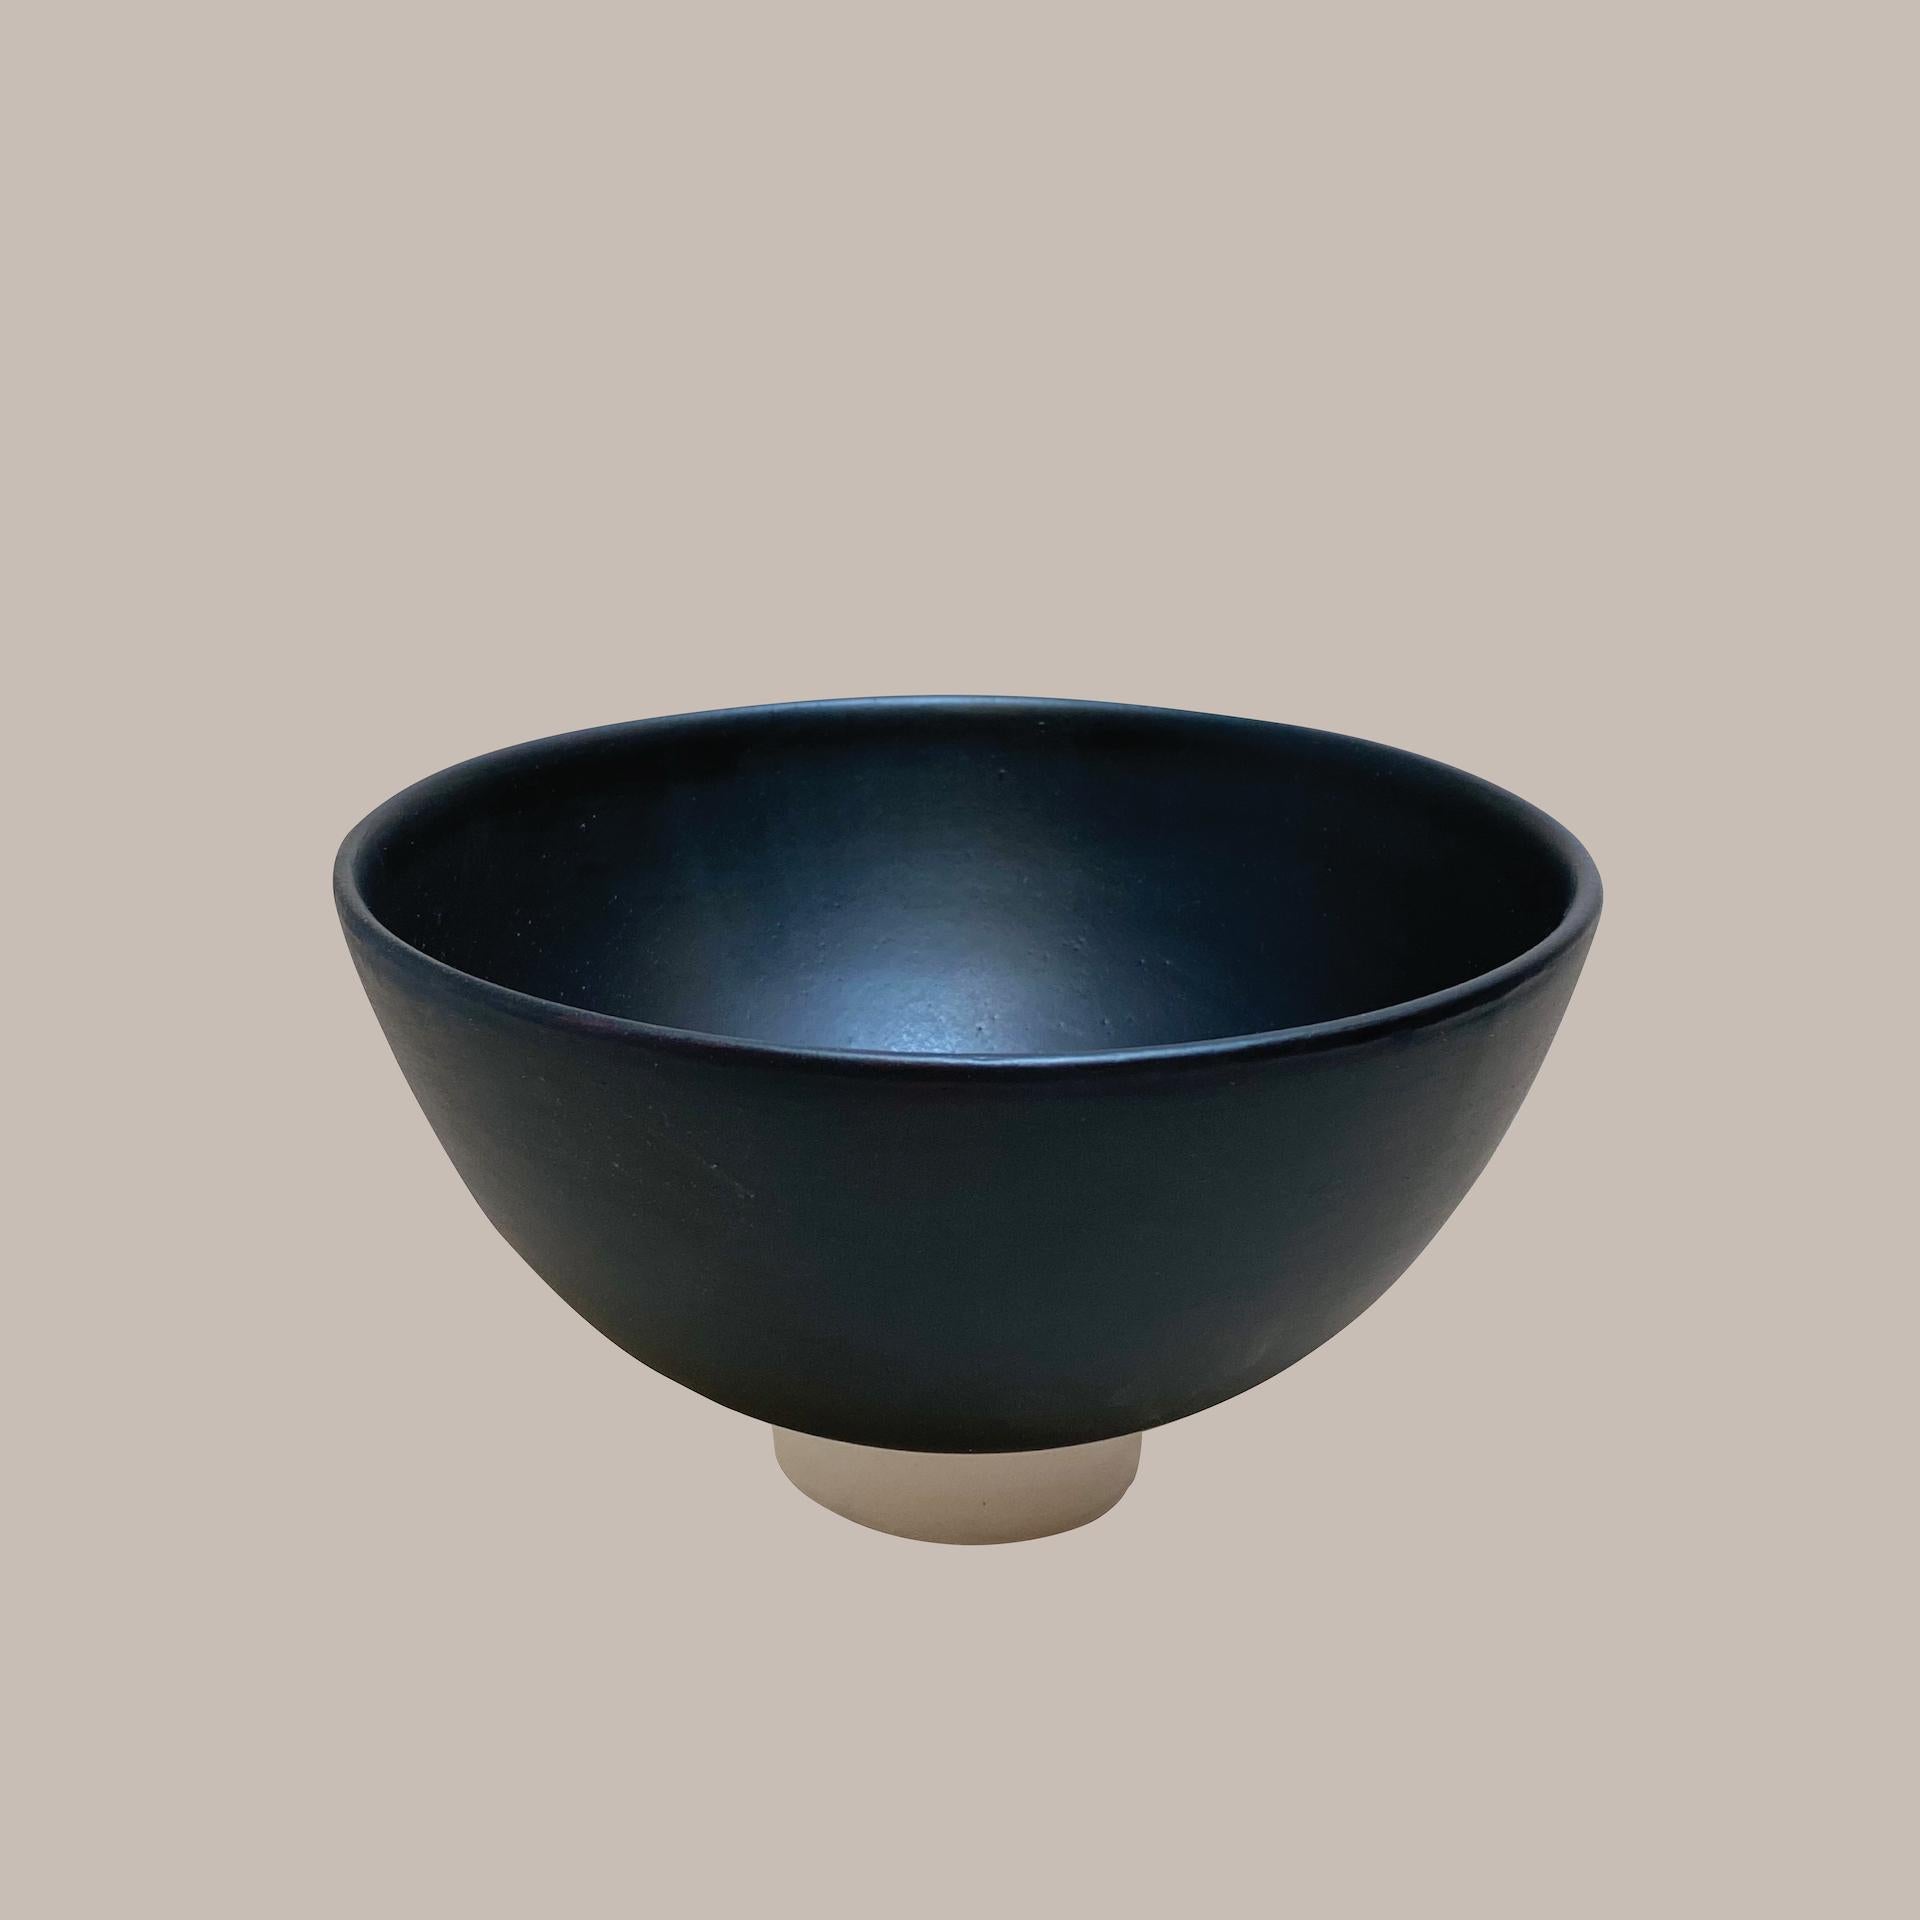 Contemporary Ott Another Paradigmatic Handmade Ceramic High-Plate by Studio Yoon Seok-Hyeon For Sale